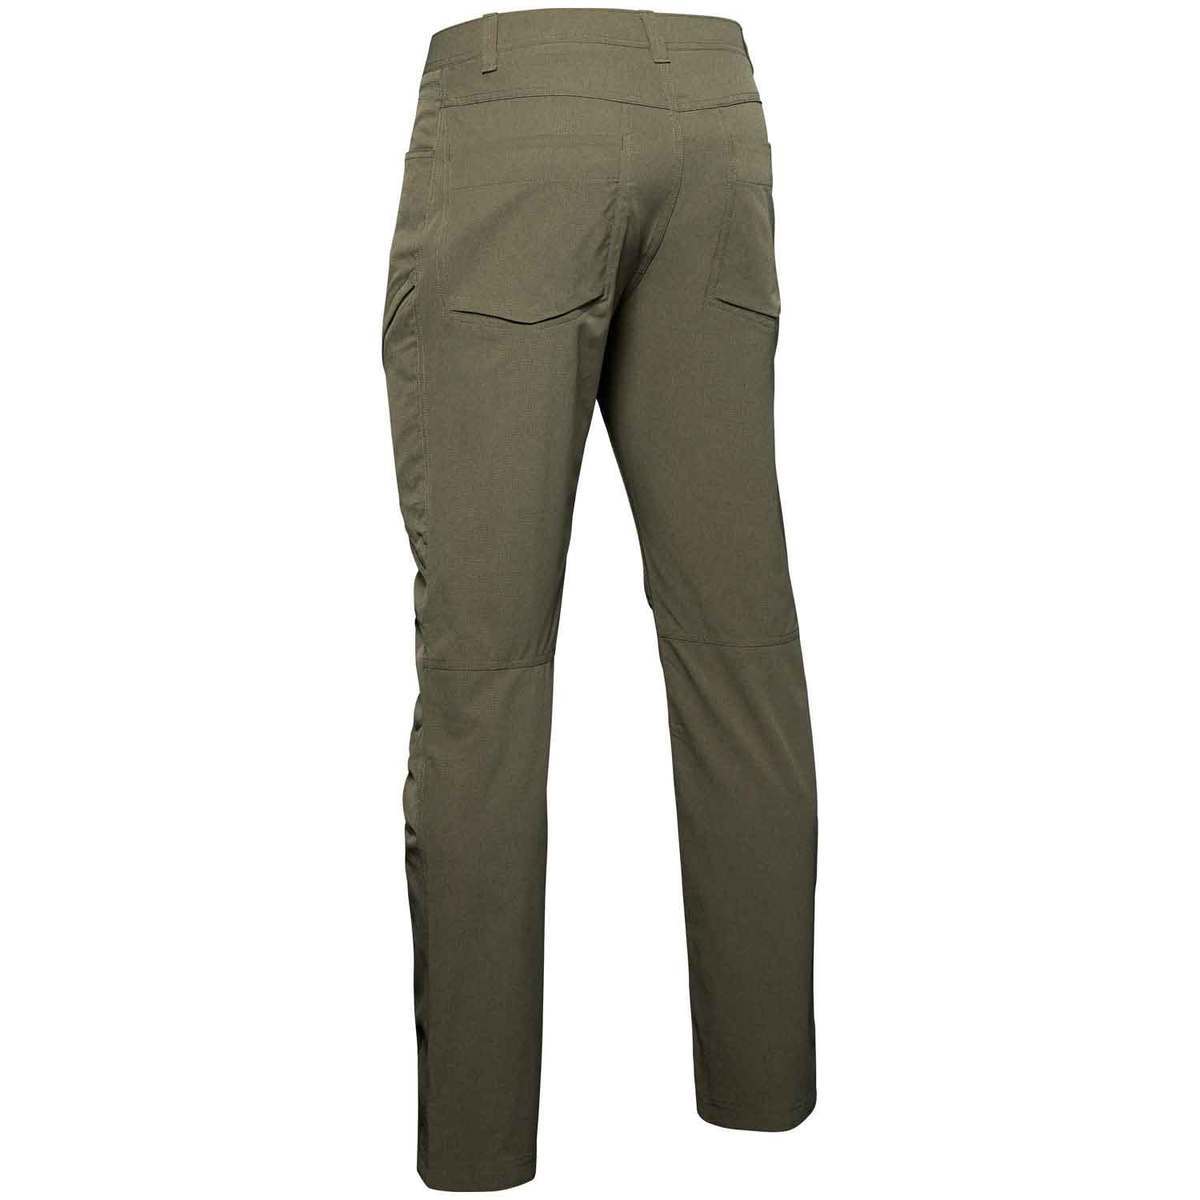 Under Armour Men's Adapt Casual Pants - Marine Od Green - 30X32 ...